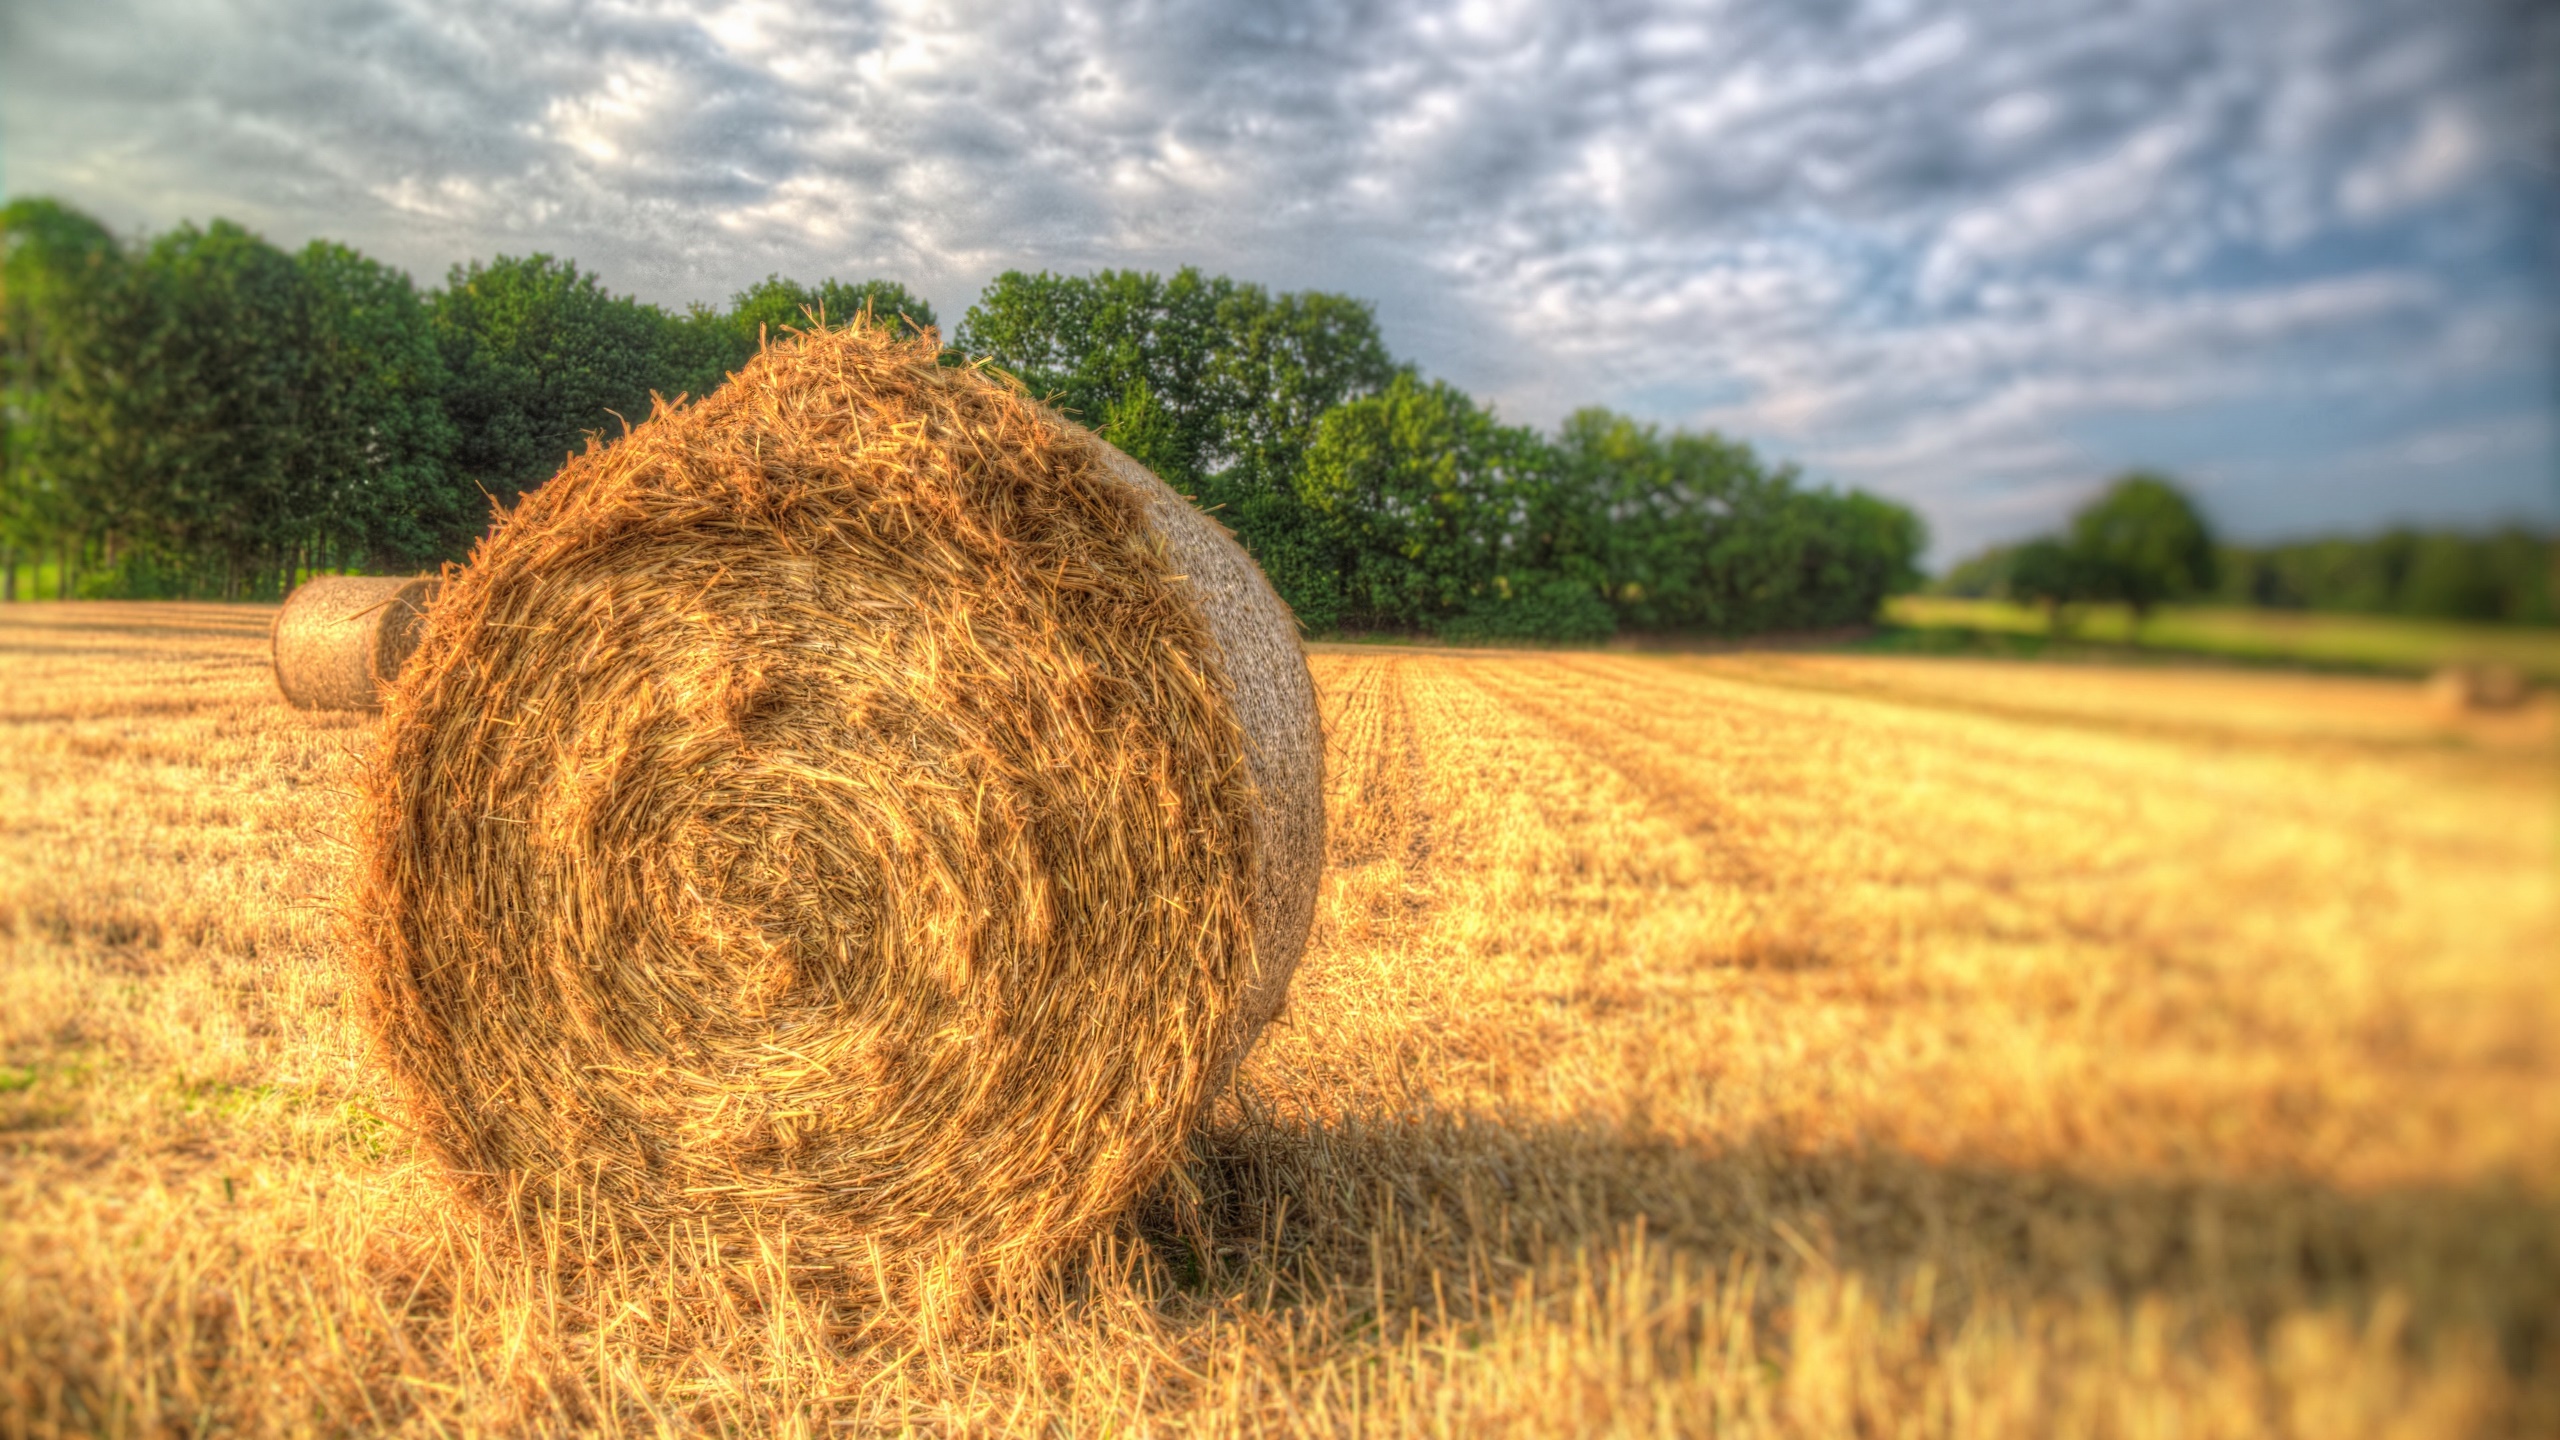 General 2560x1440 outdoors field straw hay bales